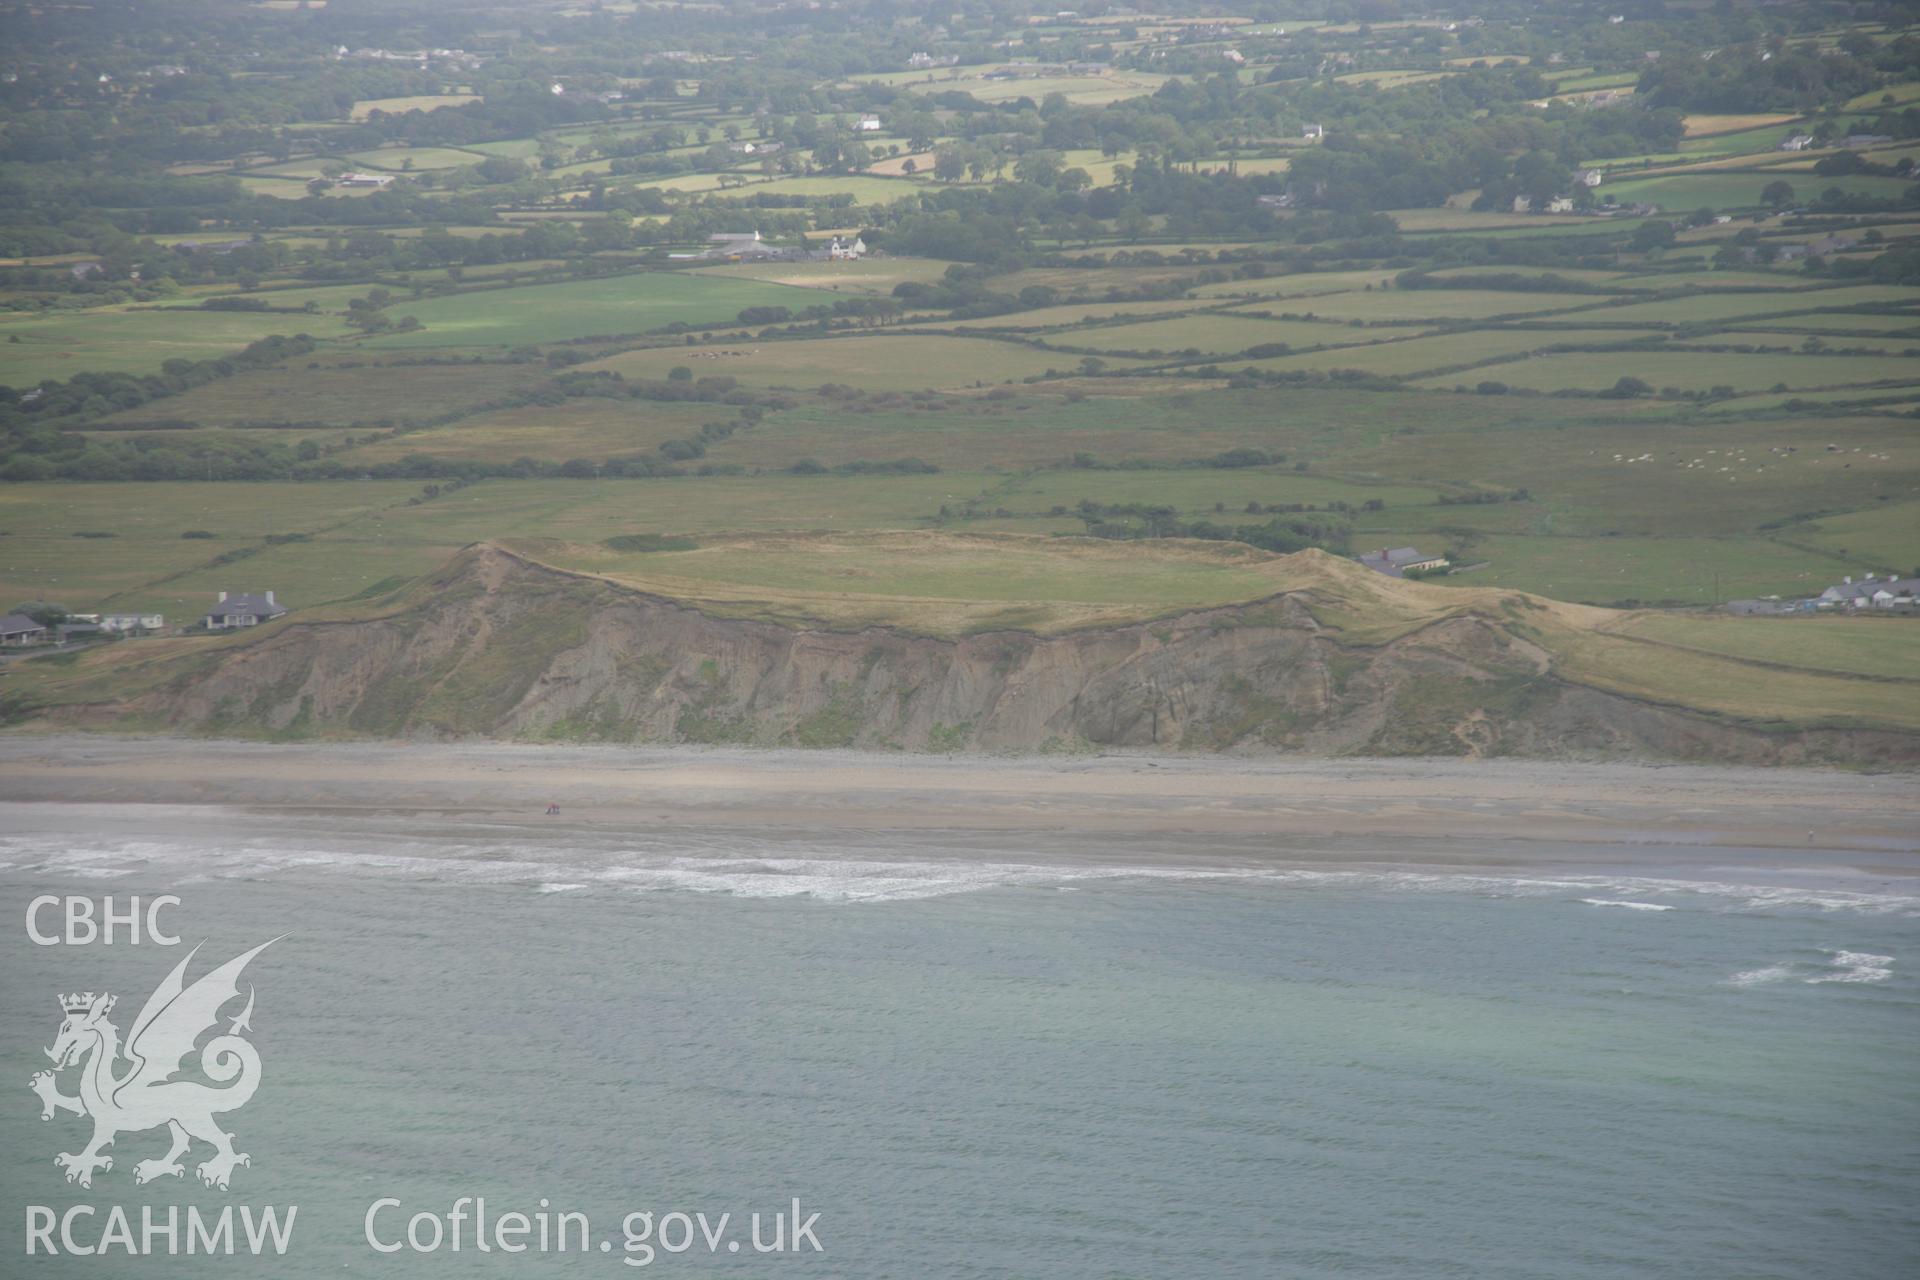 RCAHMW colour oblique aerial photograph of Dinas Dinlle Hillfort, Llandwrog. Viewed from the west showing the fort's 'cross-section' in the cliffs. Taken on 03 August 2006 by Toby Driver.